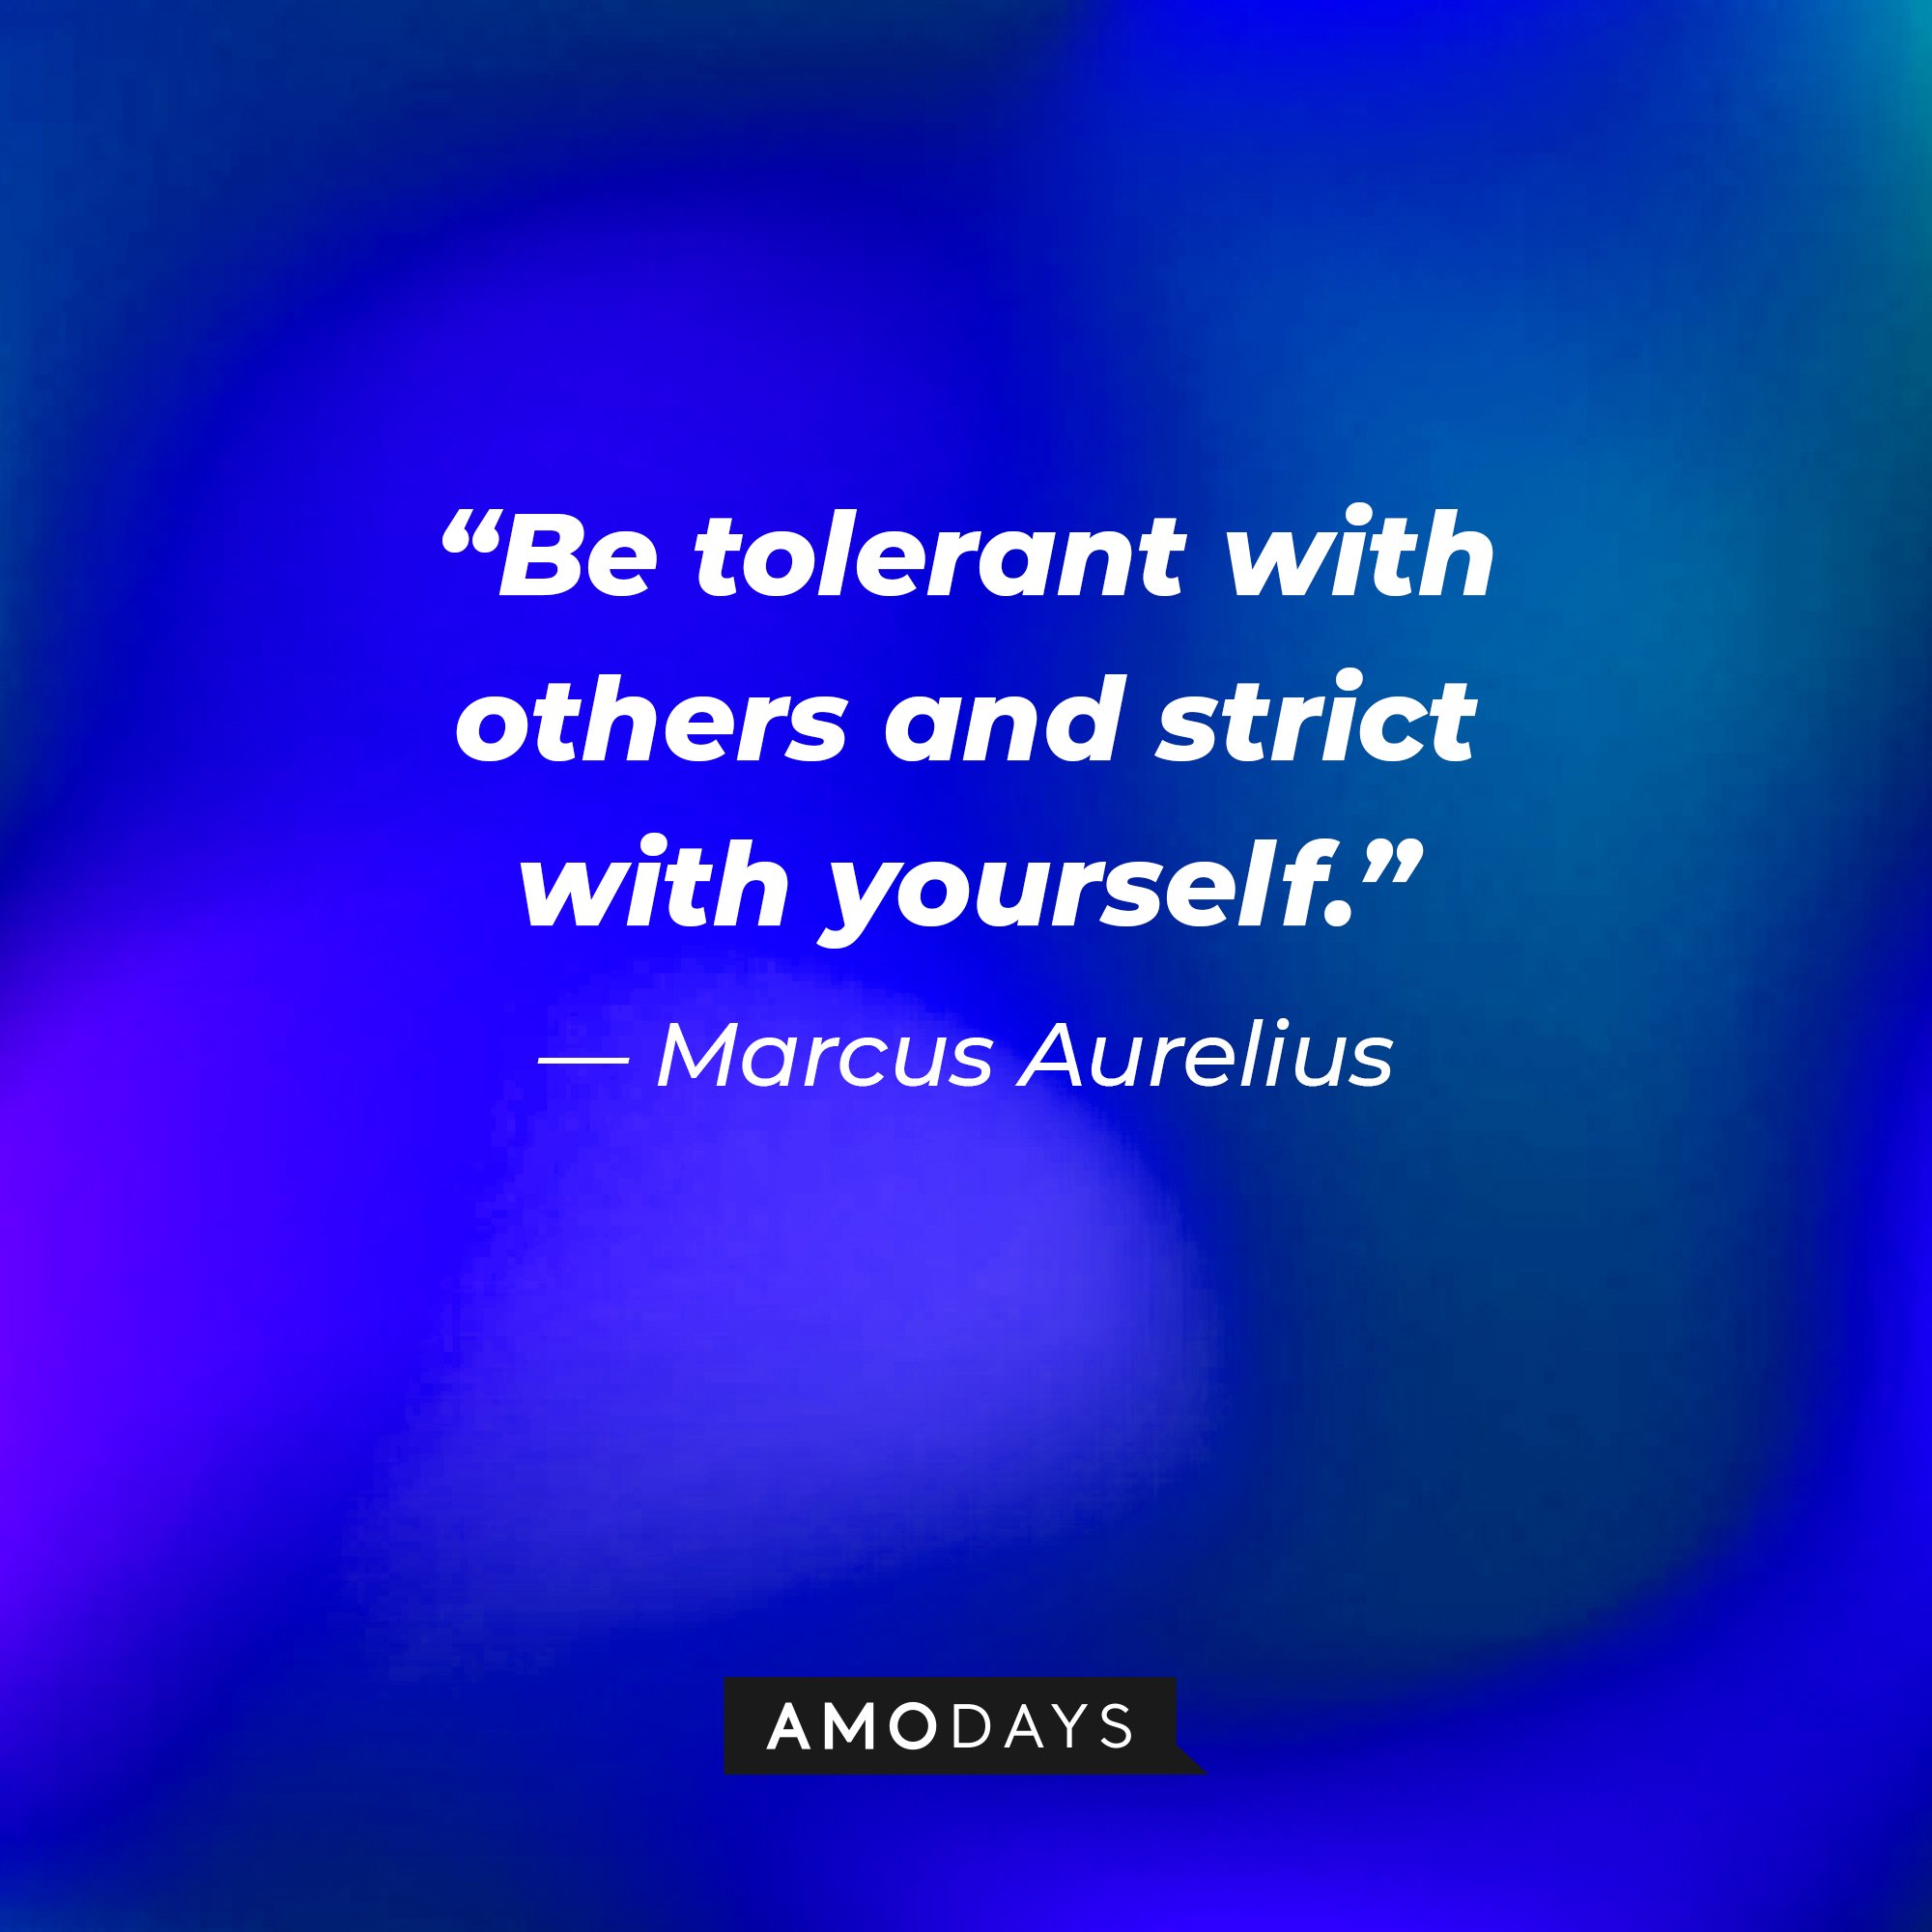 Marcus Aurelius’ quote: “Be tolerant with others and strict with yourself.” | Image: AmoDays